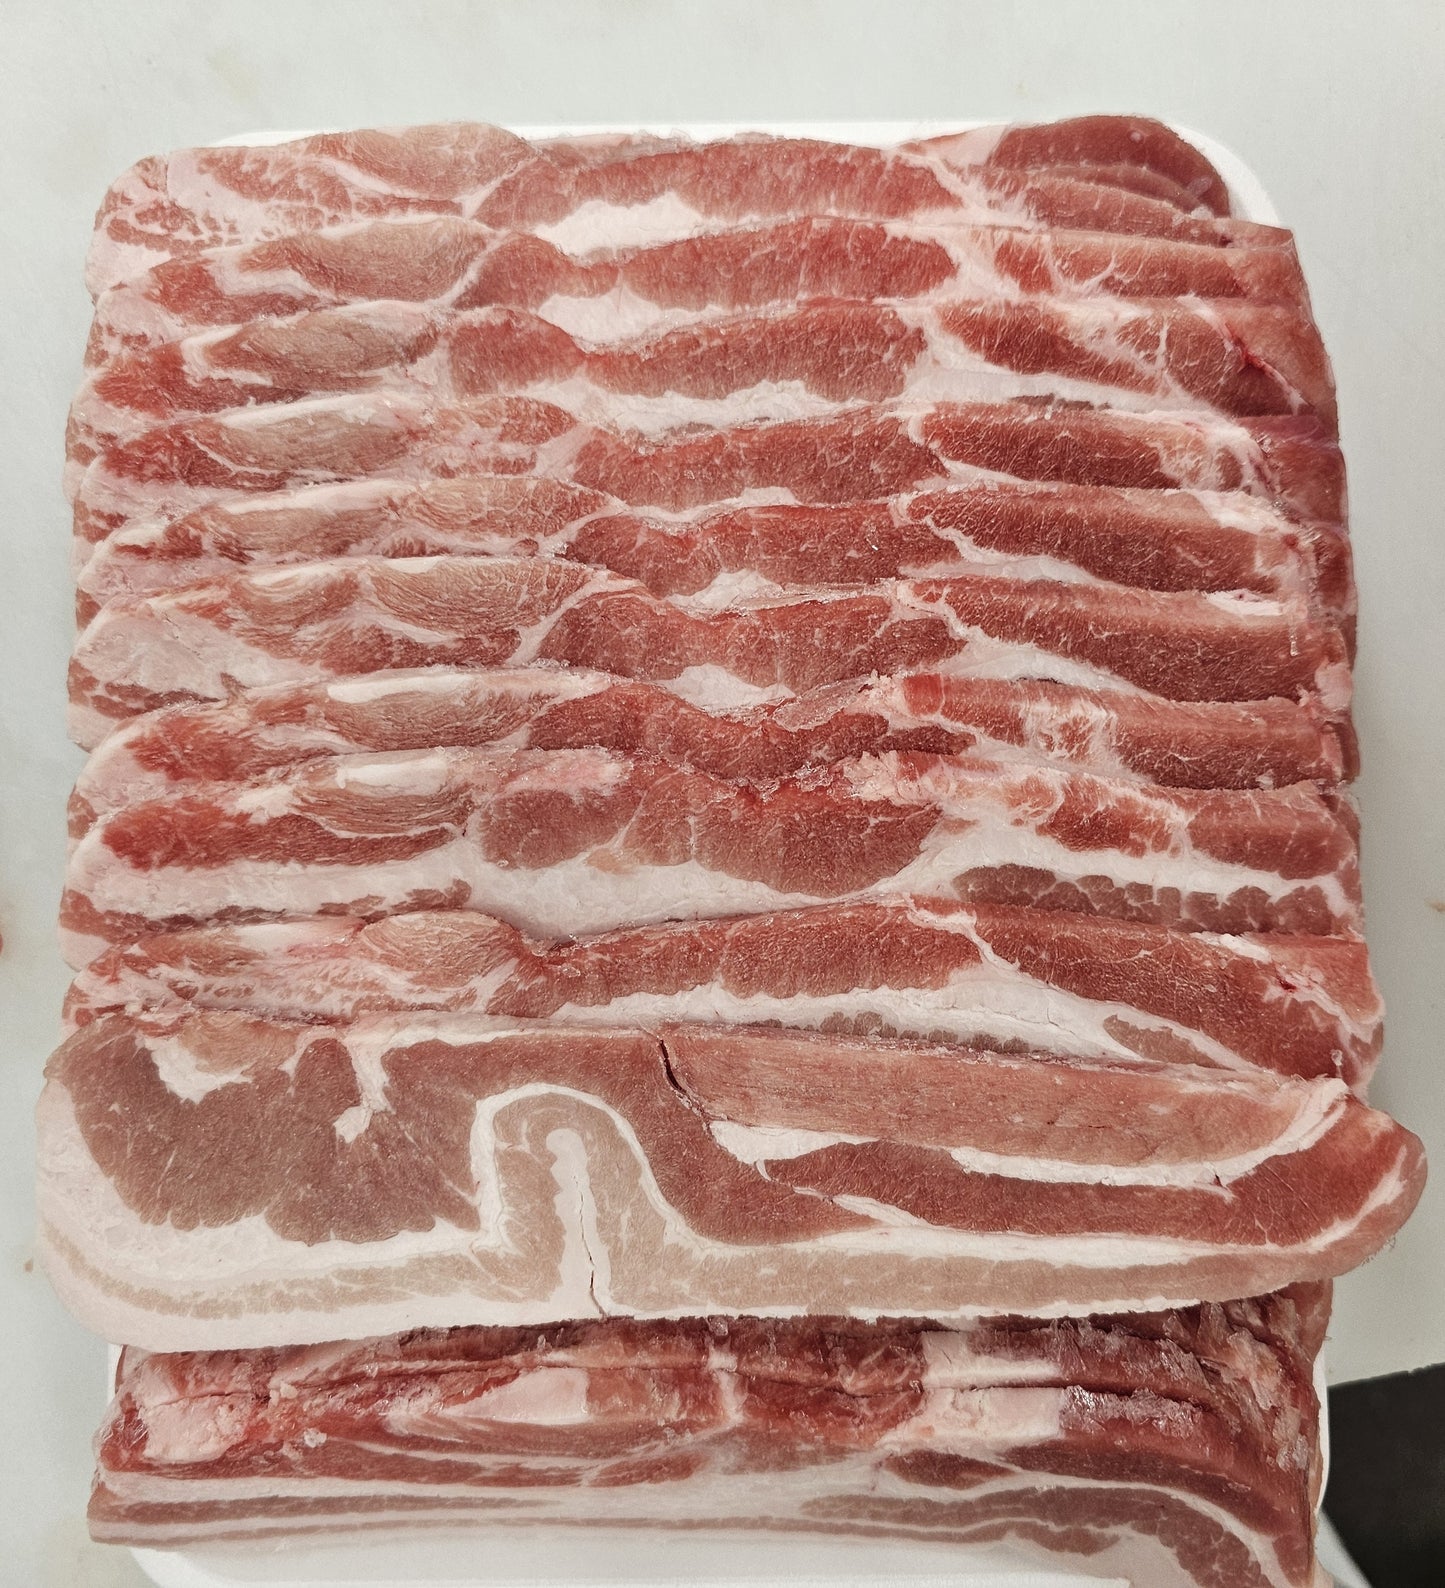 Pork Single Ribbed Belly Slice 3Lbs Tray Pack - Frozen